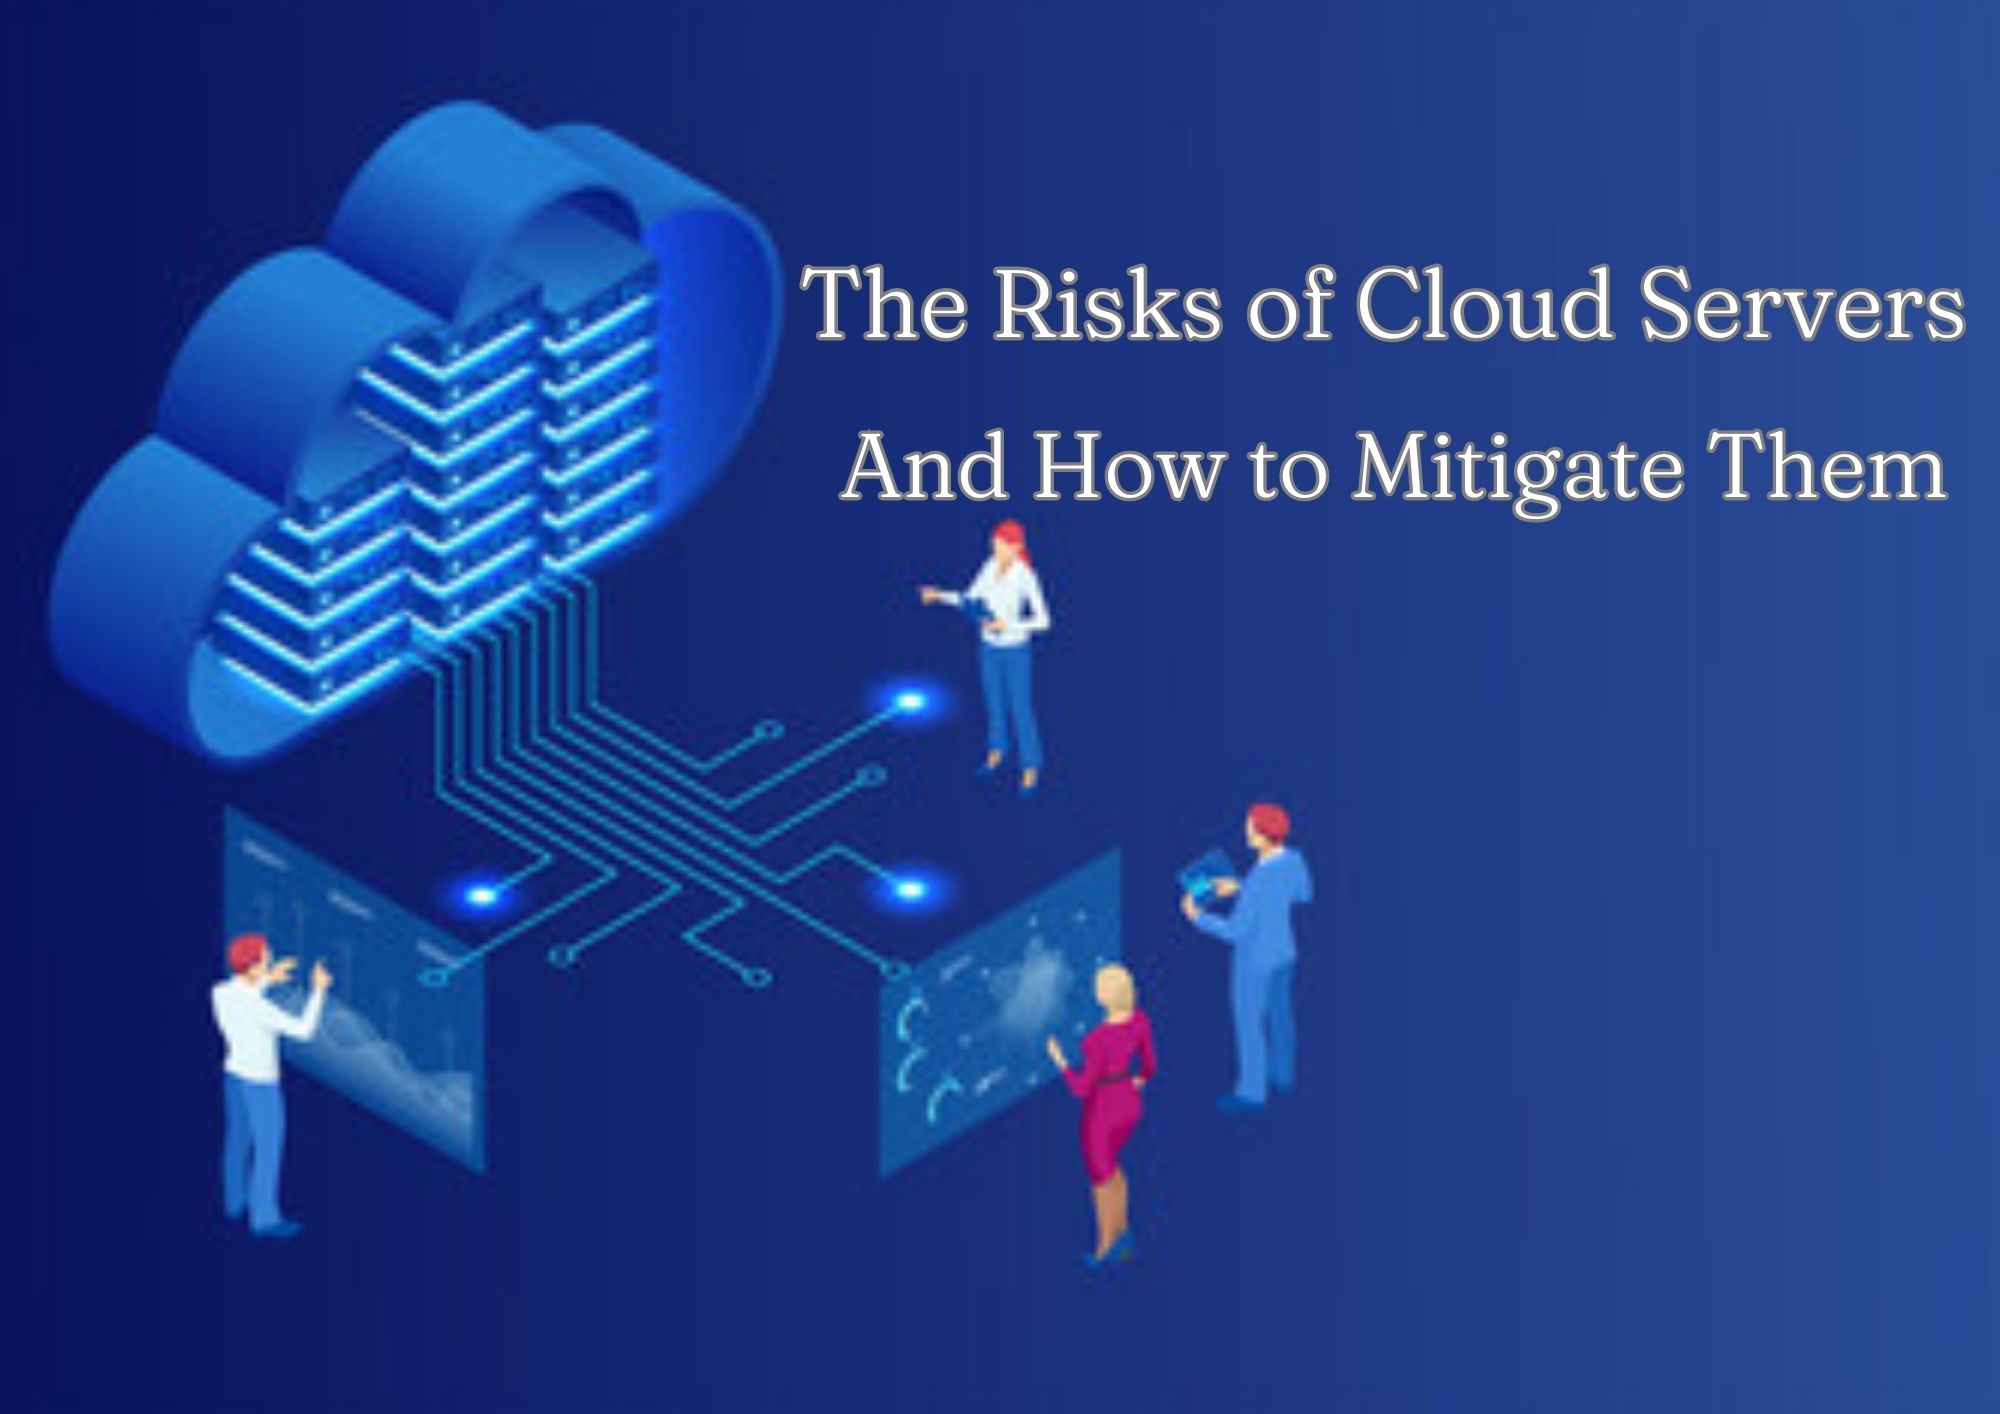 The risks of cloud servers and how to mitigate